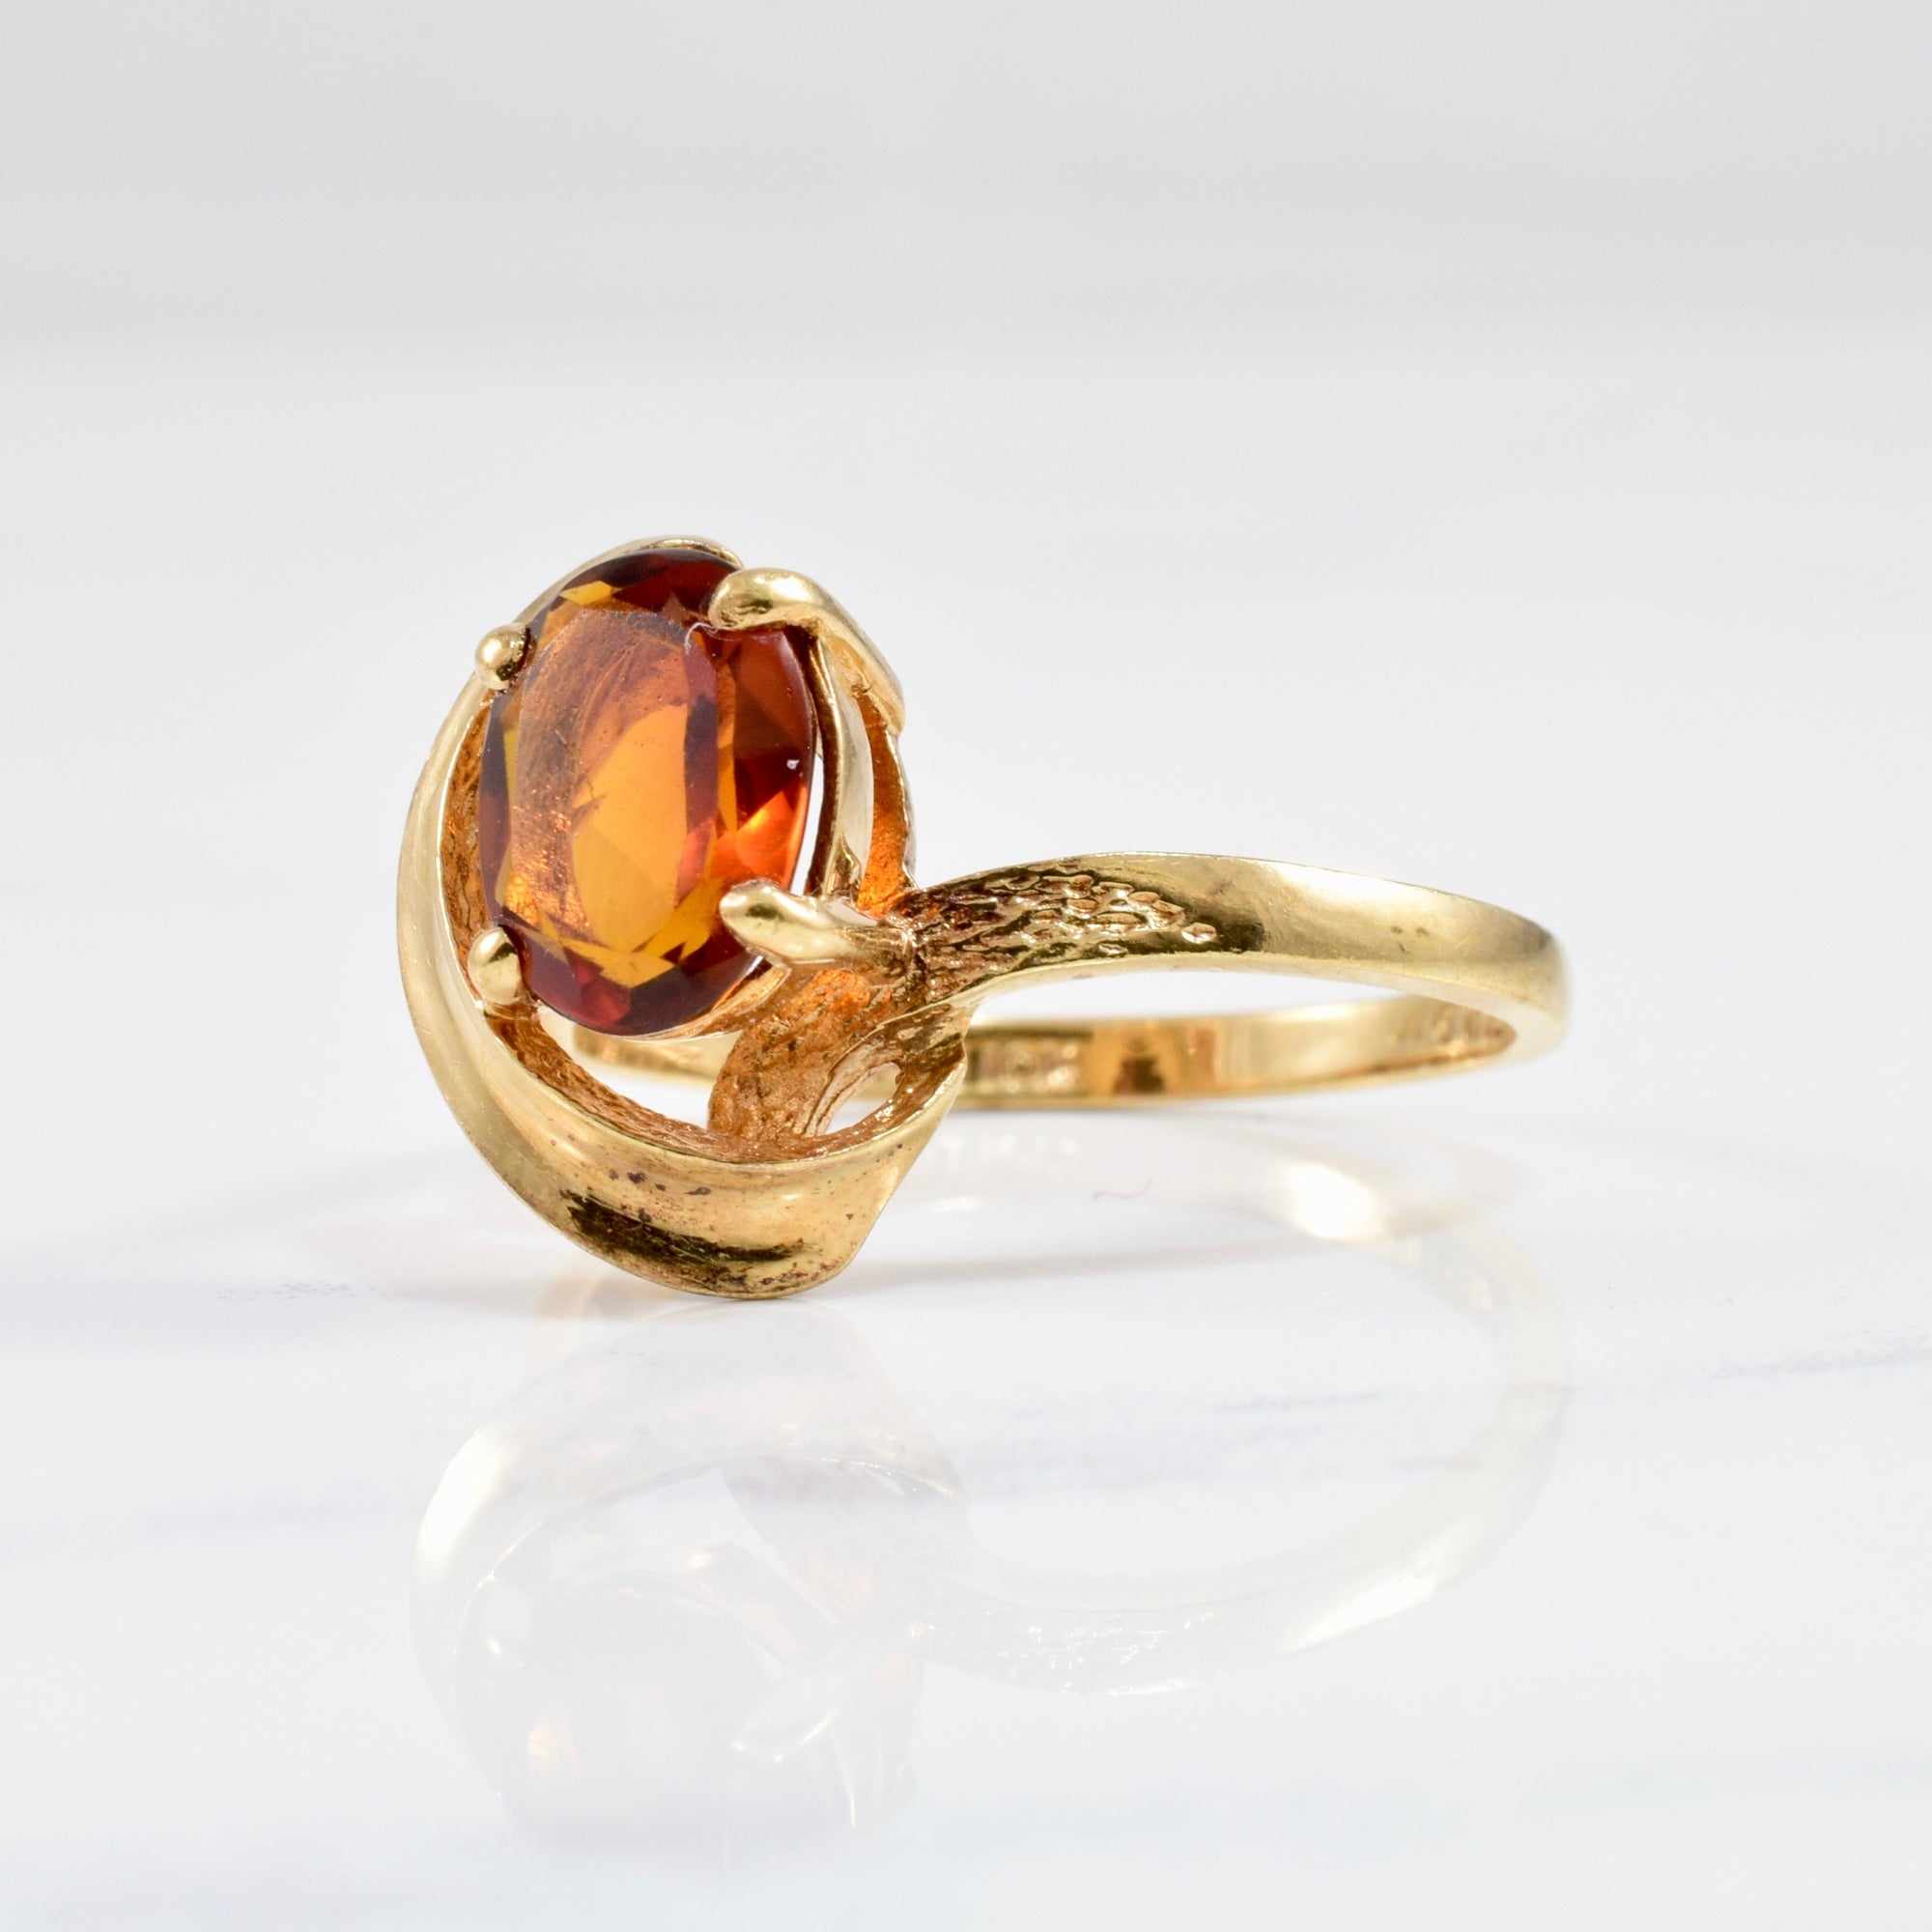 1970's Abstract Citrine Ring | SZ 7.25 |